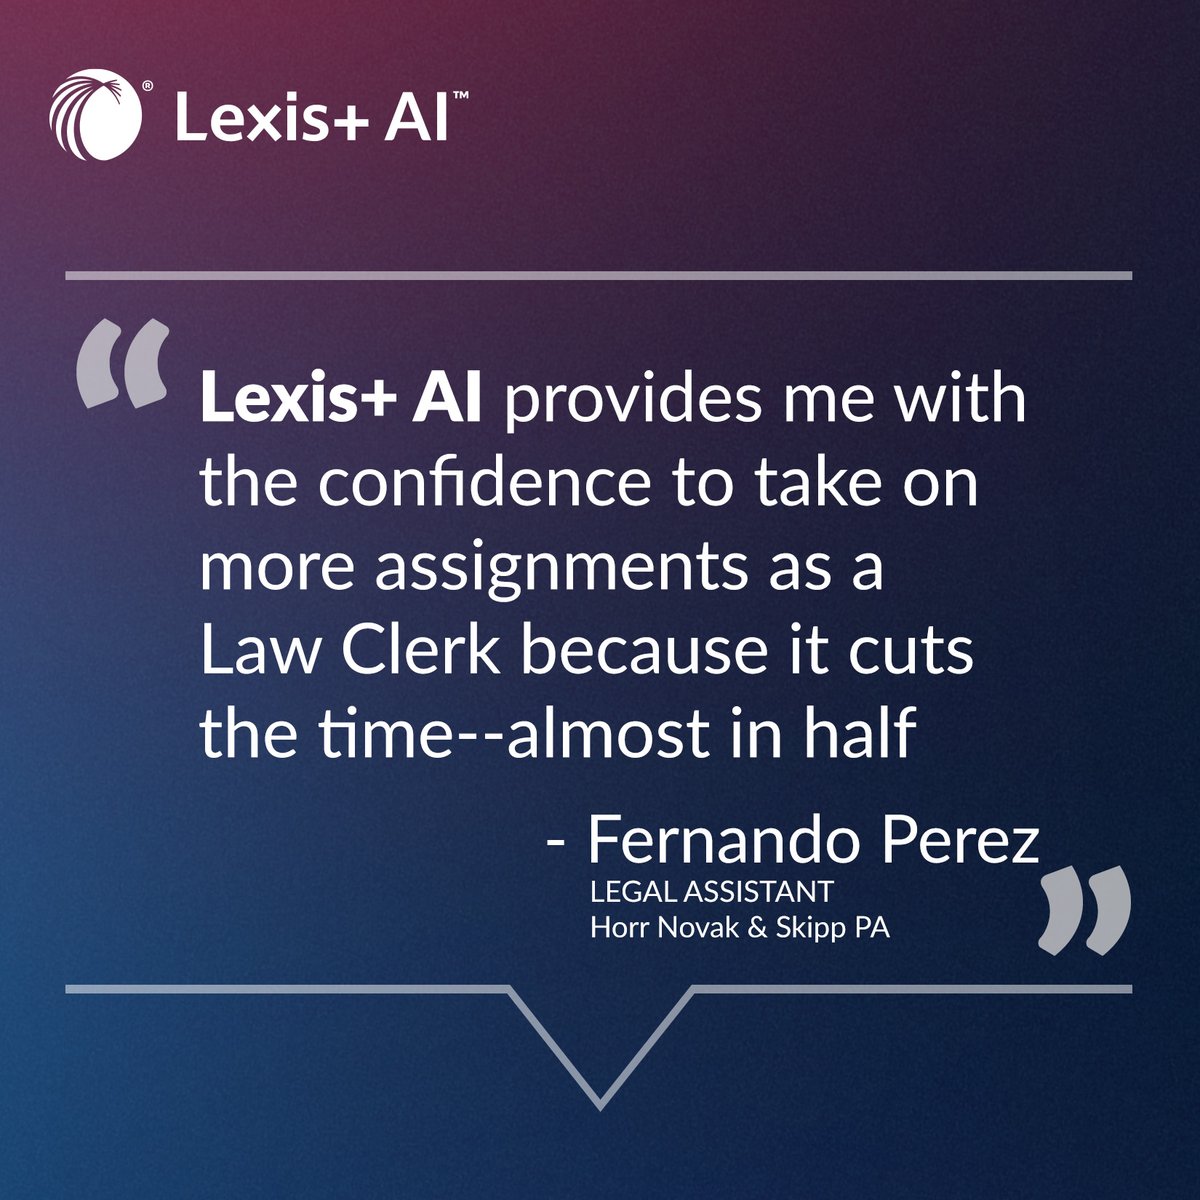 Customers told us they save up to 11 hours per week using Lexis+ AI. Get a trial and see how quickly you can transform your legal work: bit.ly/LexisPlusAI #LexisNexis #LegalTech #AI #LegalAI